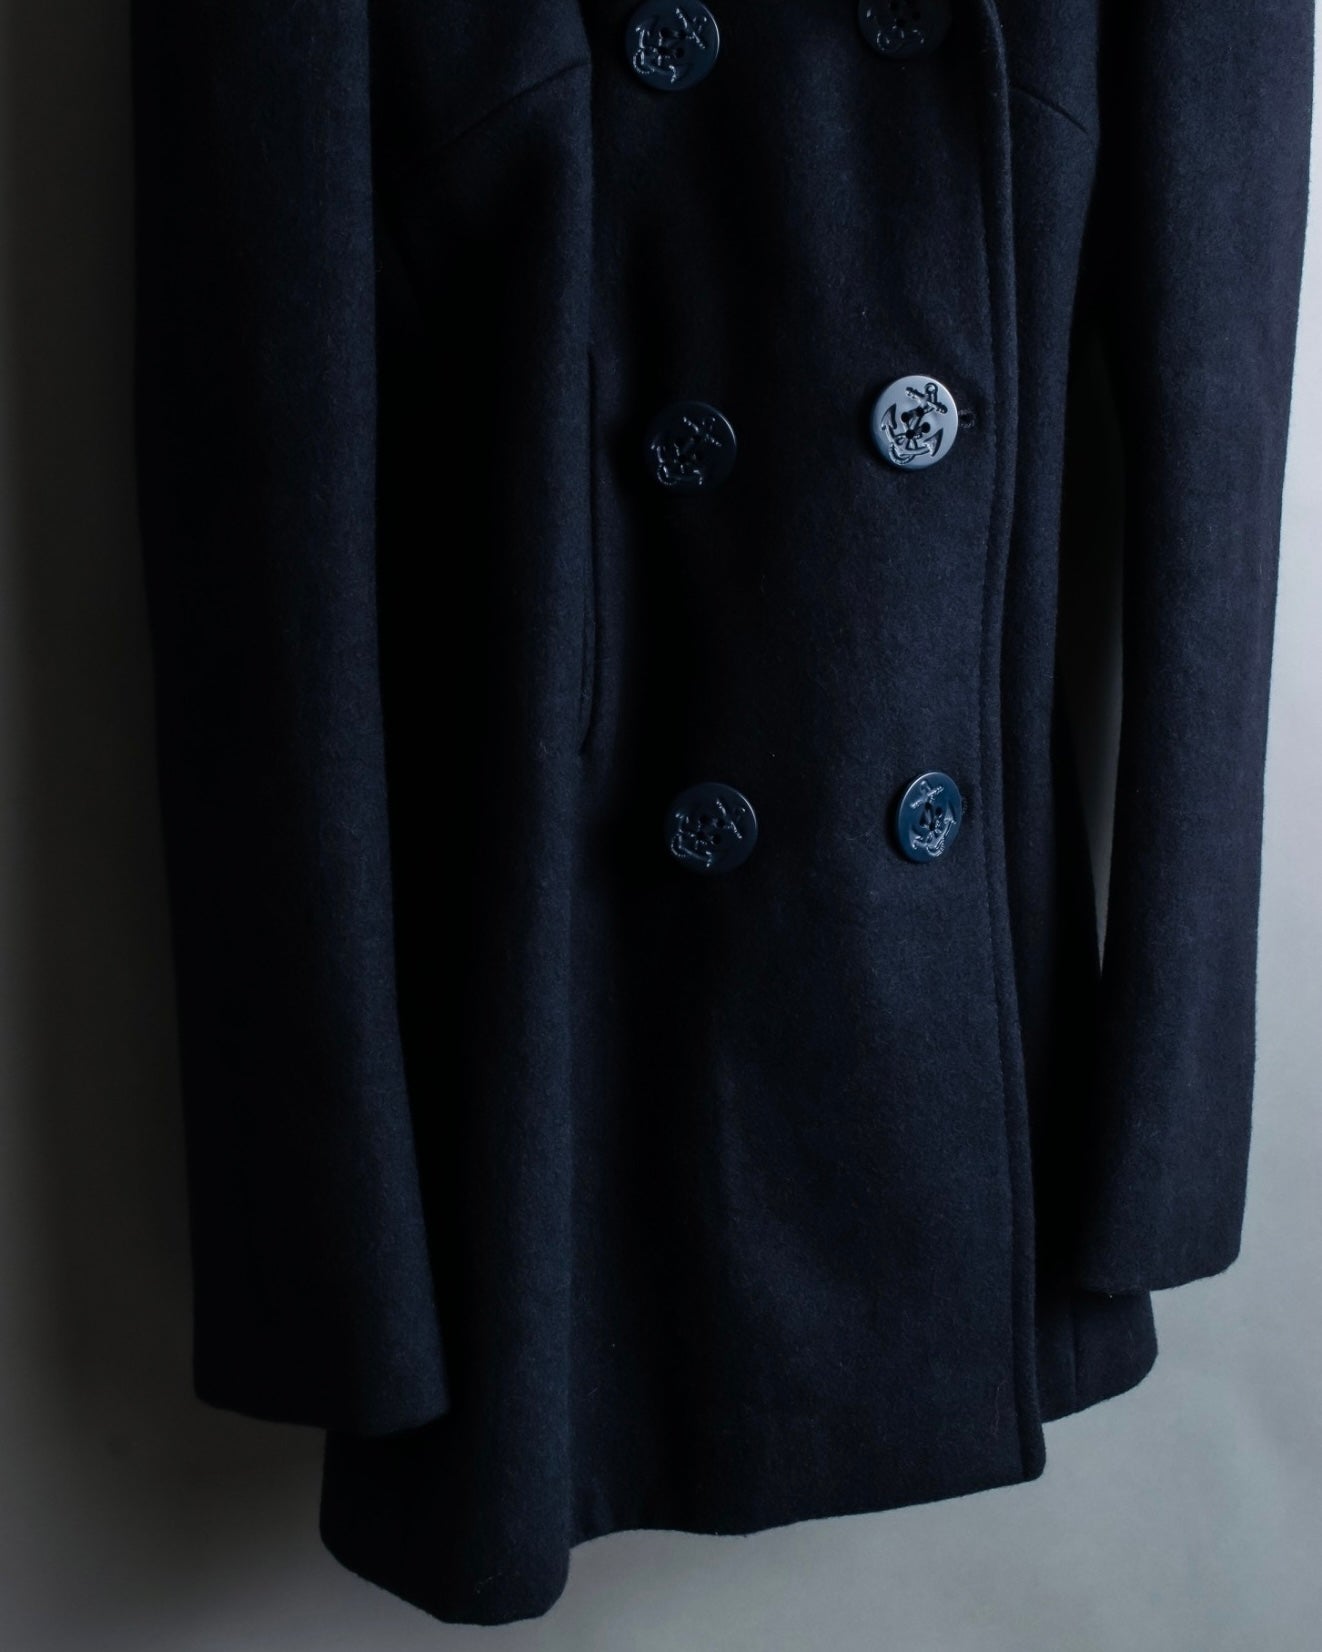 "D&G" Slim silhouette leather patch P coat